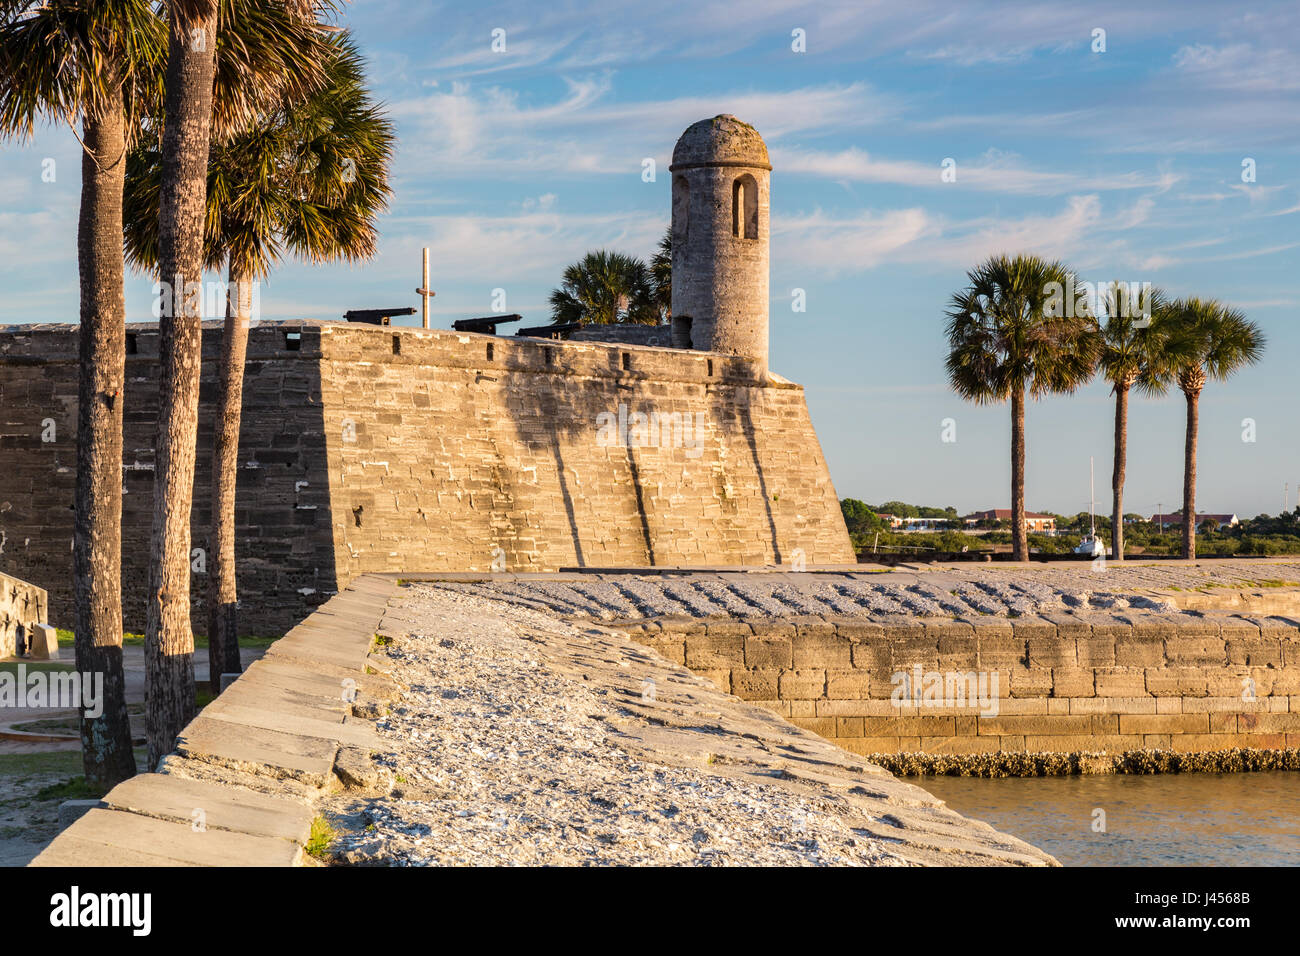 Castillo de San Marcos National Monument bathed in early morning light, St. Augustine, Florida Stock Photo